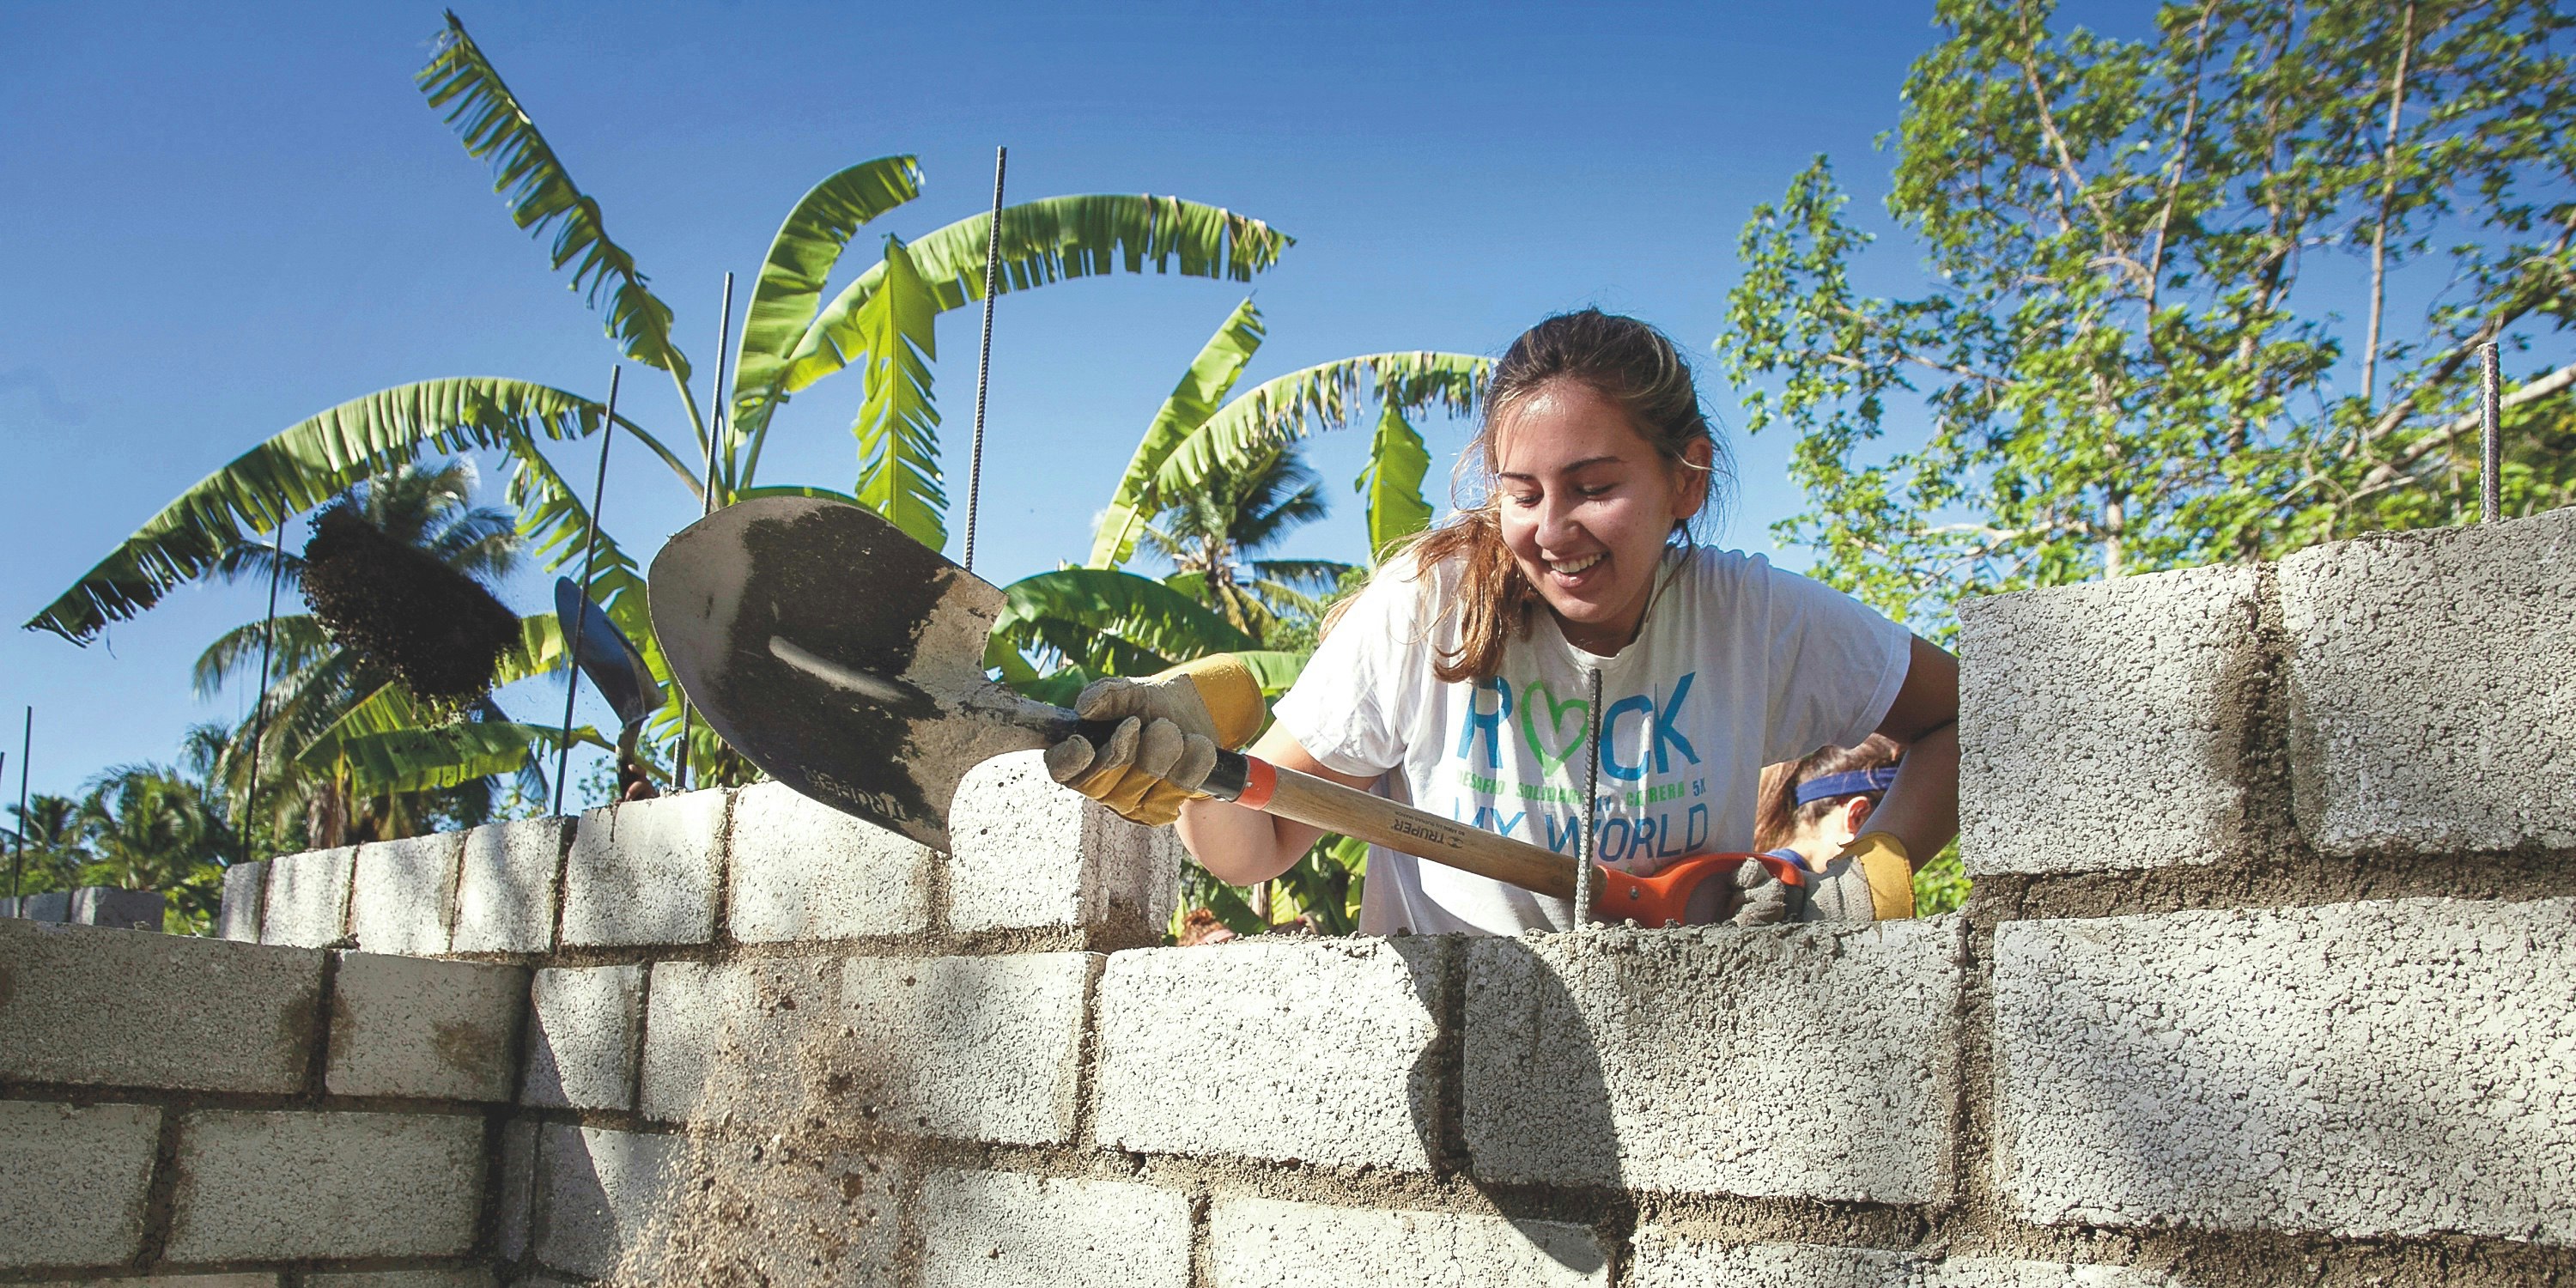 The Rustic Pathways Foundation Paves Way for Greater Impact